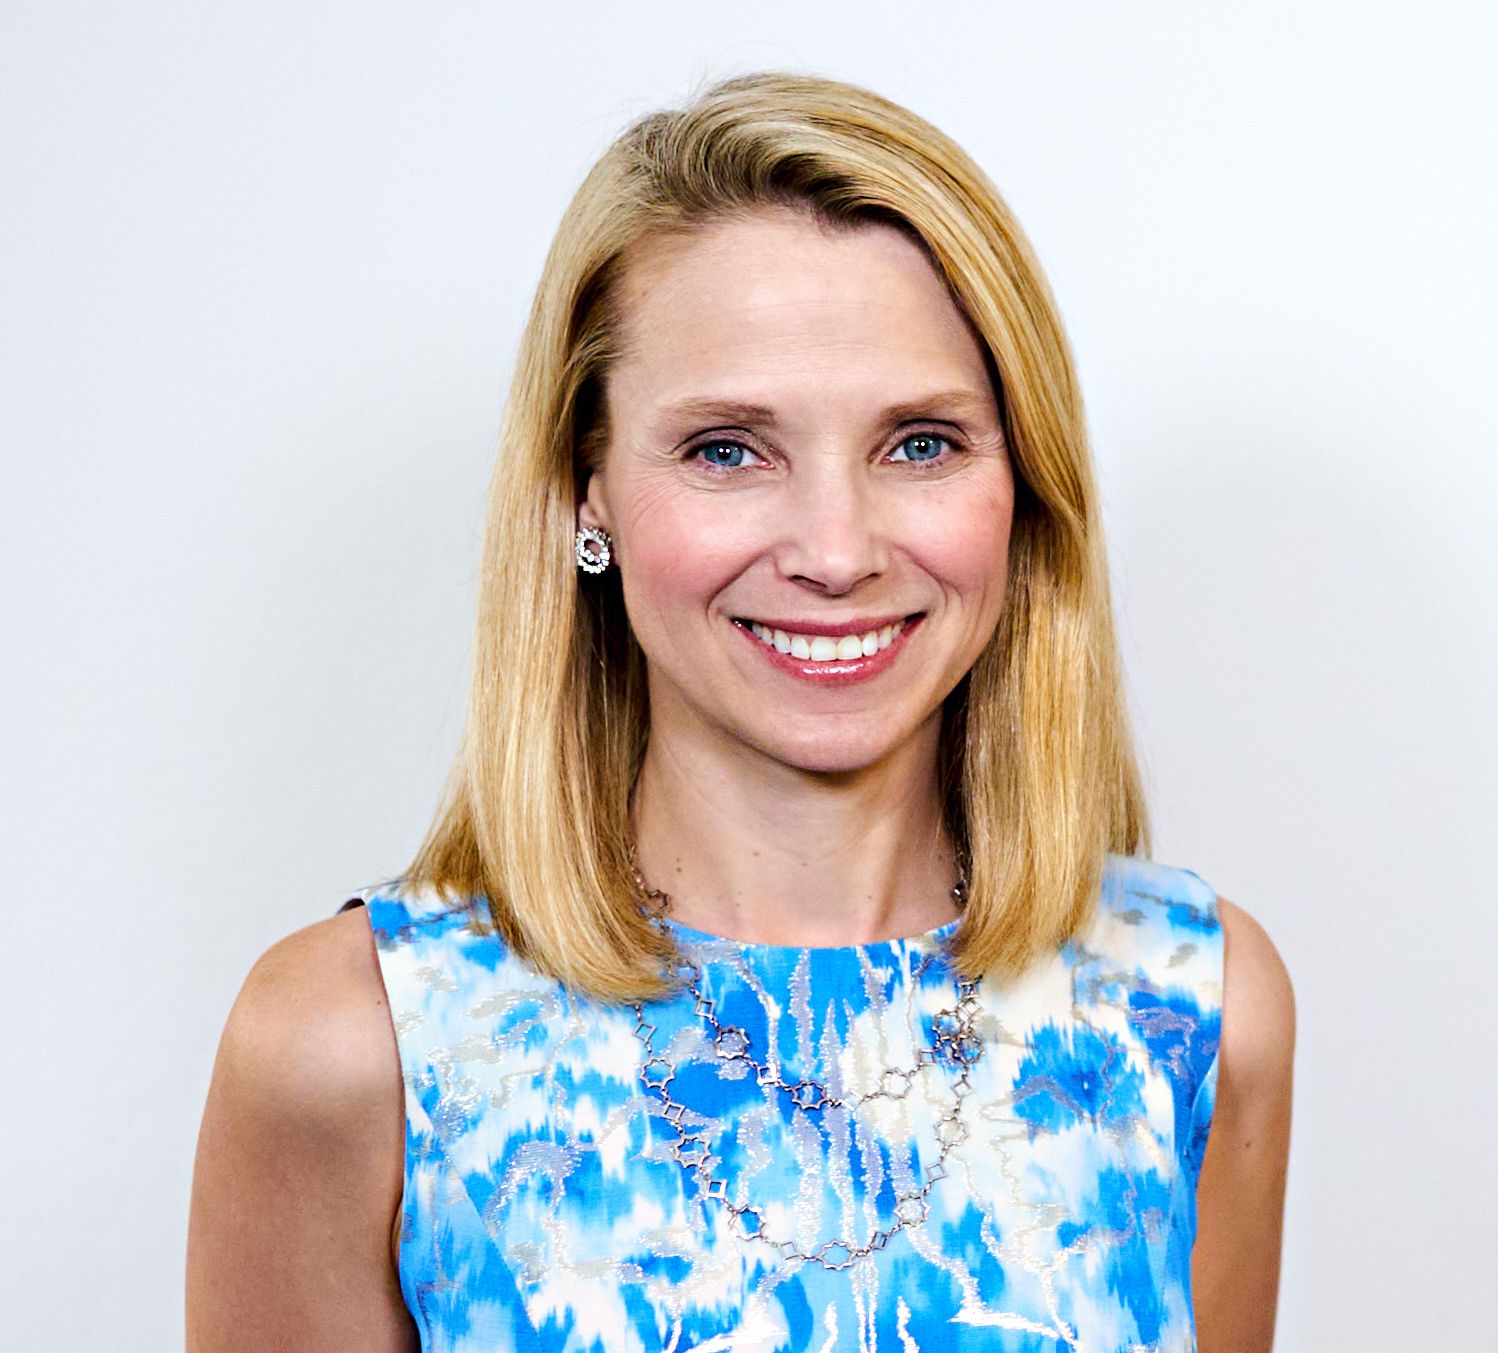 Marissa Mayer and telecommuting: Yahoo CEO got it right - The